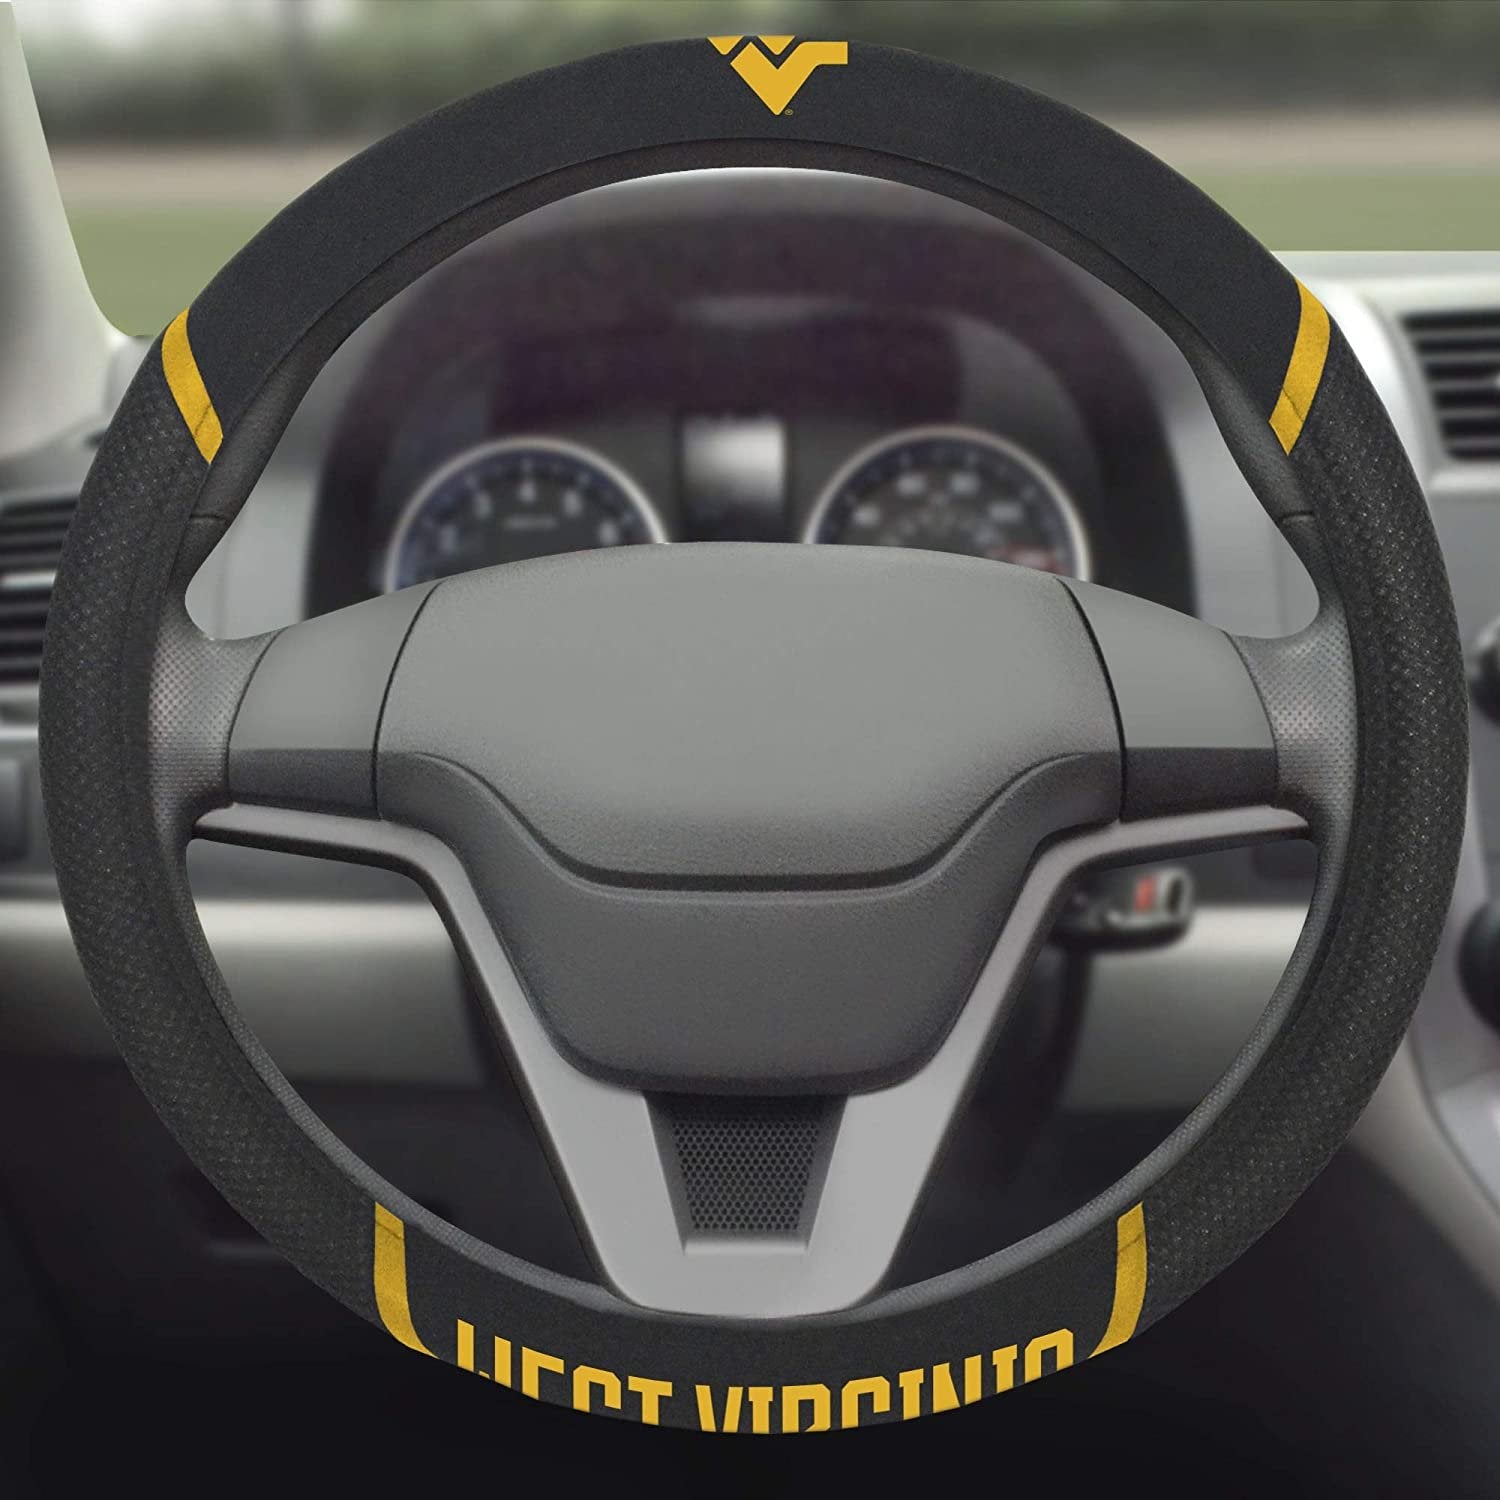 West Virginia Mountaineers Steering Wheel Cover Embroidered Black 15 Inch University